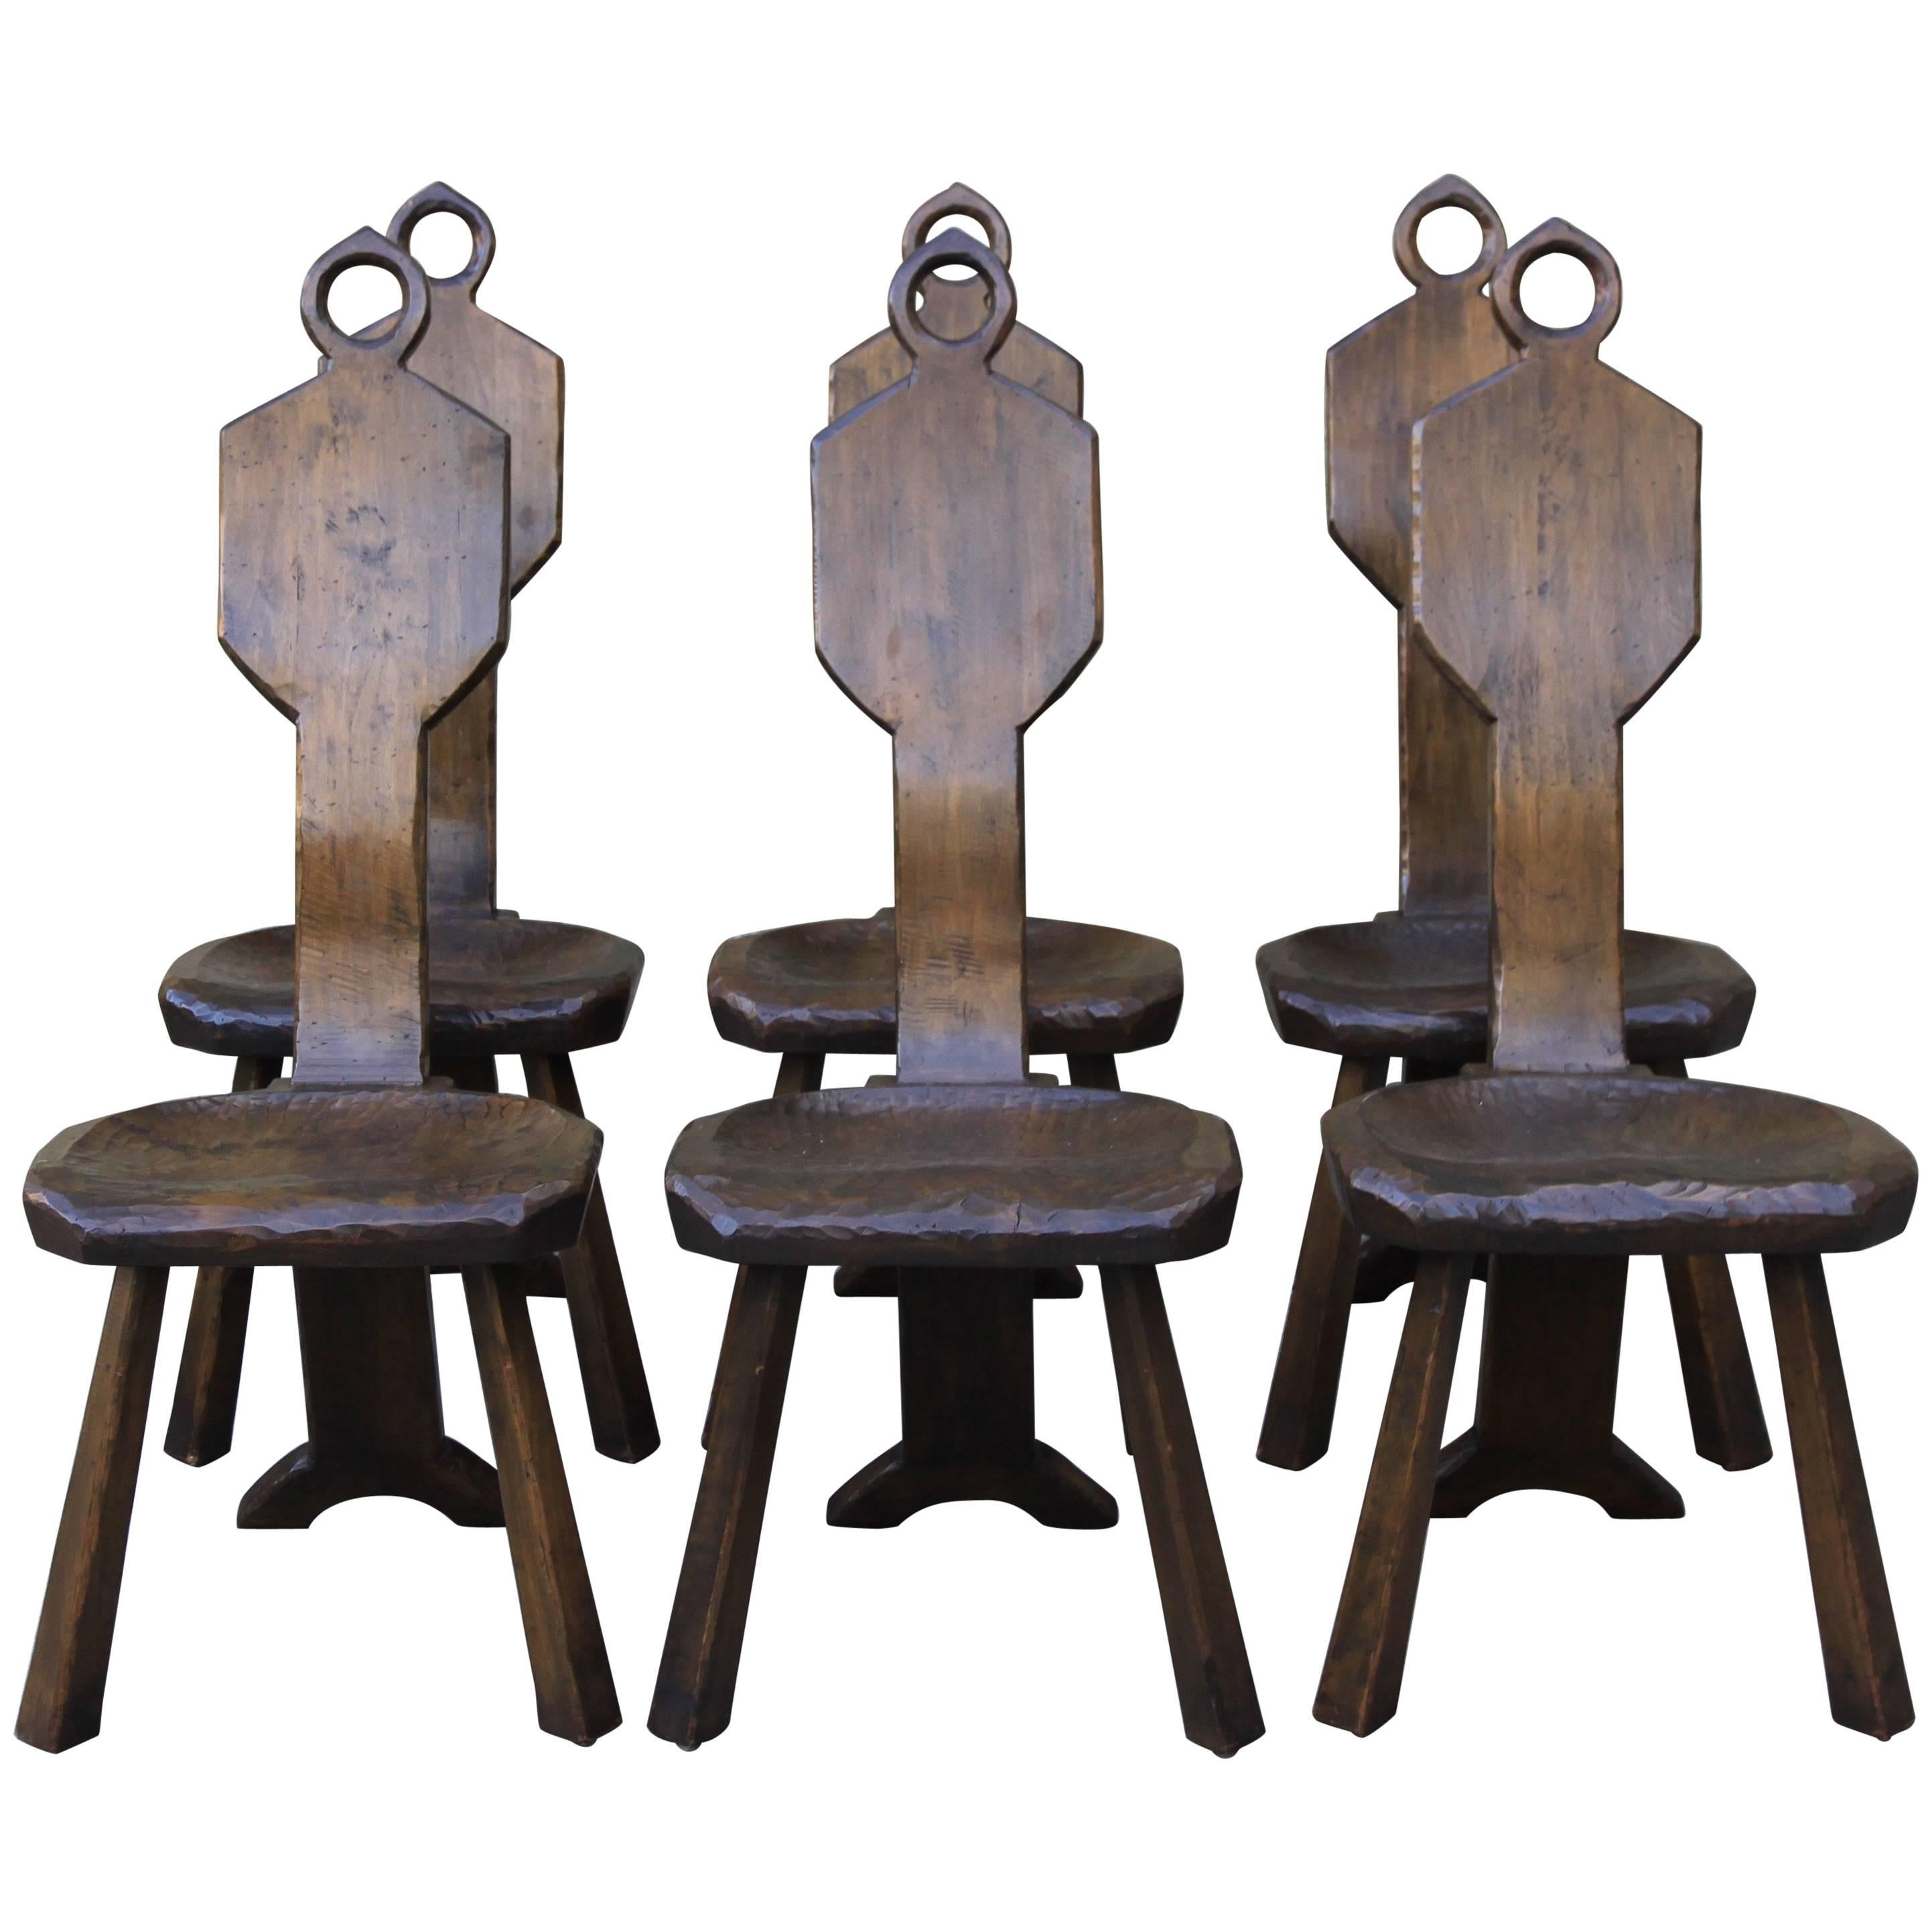 Six American Primitive Dining Chairs by John Barbor